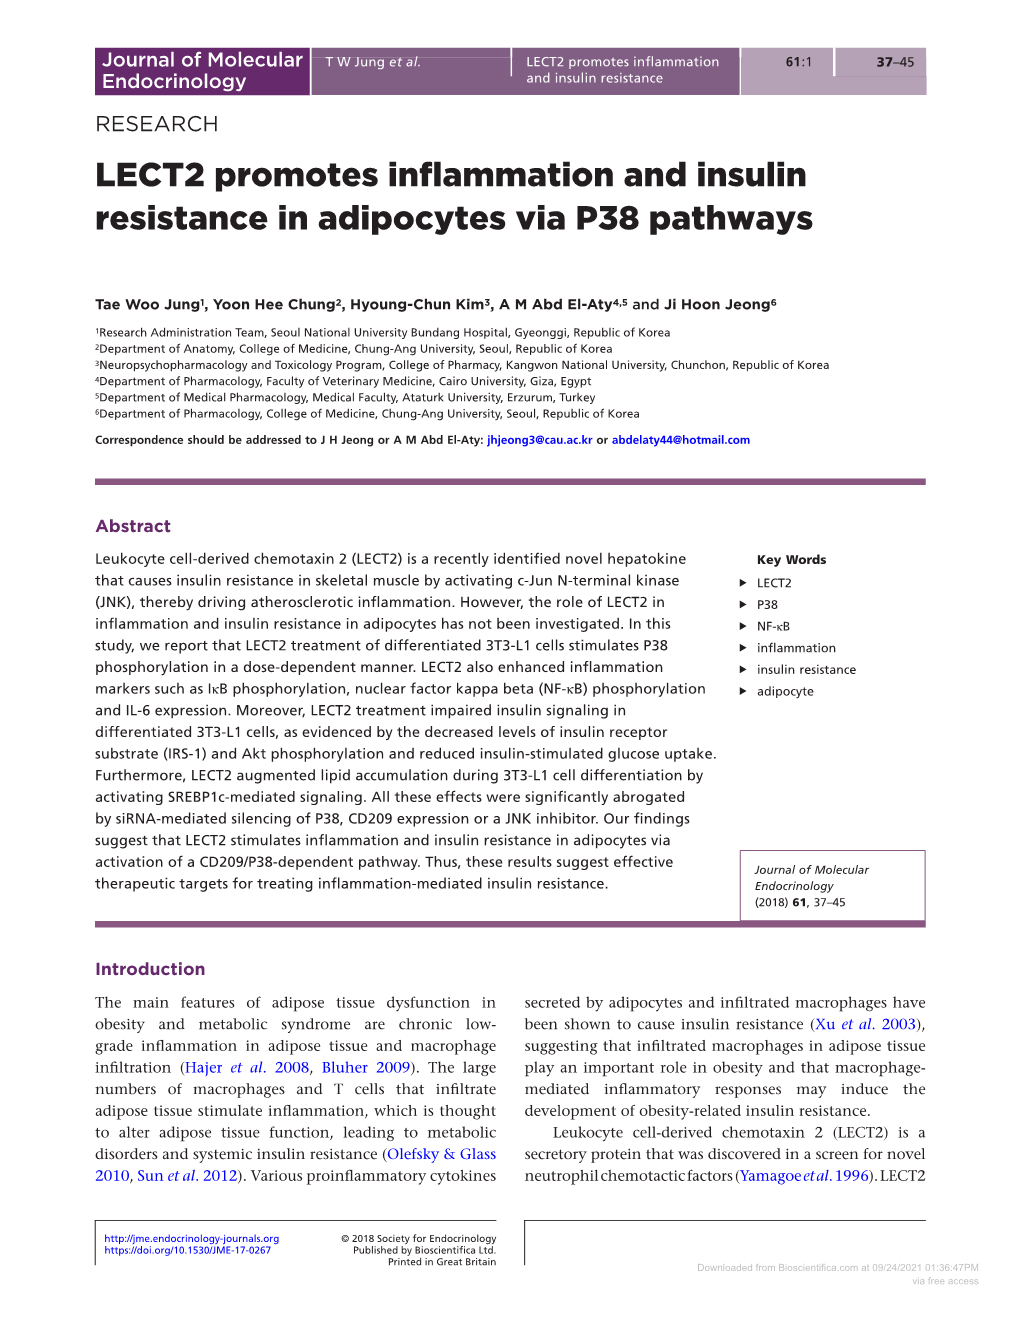 LECT2 Promotes Inflammation and Insulin Resistance in Adipocytes Via P38 Pathways